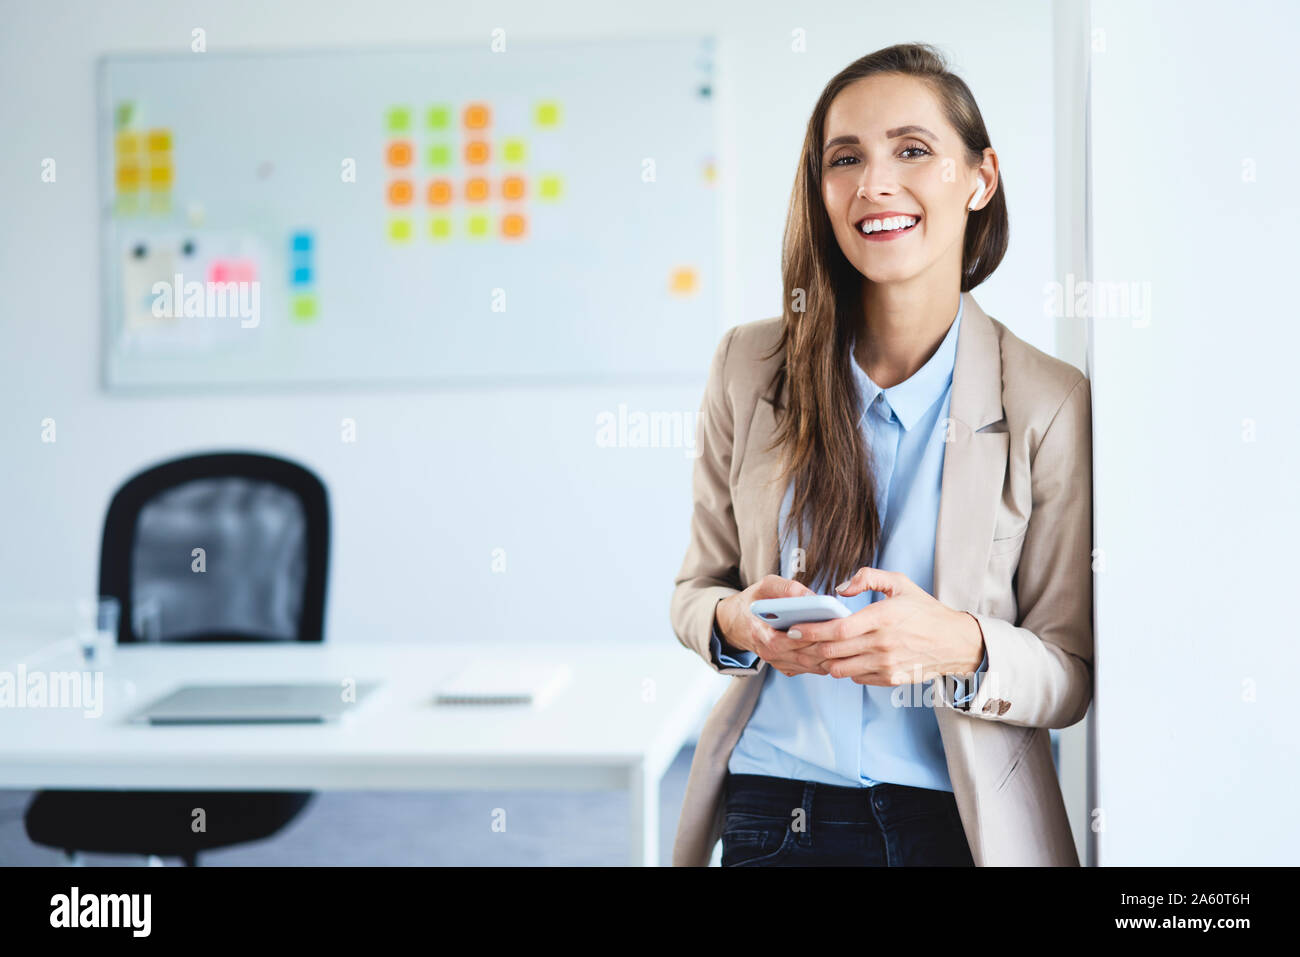 Young businesswoman standing in office holding phone and smiling at camera Stock Photo